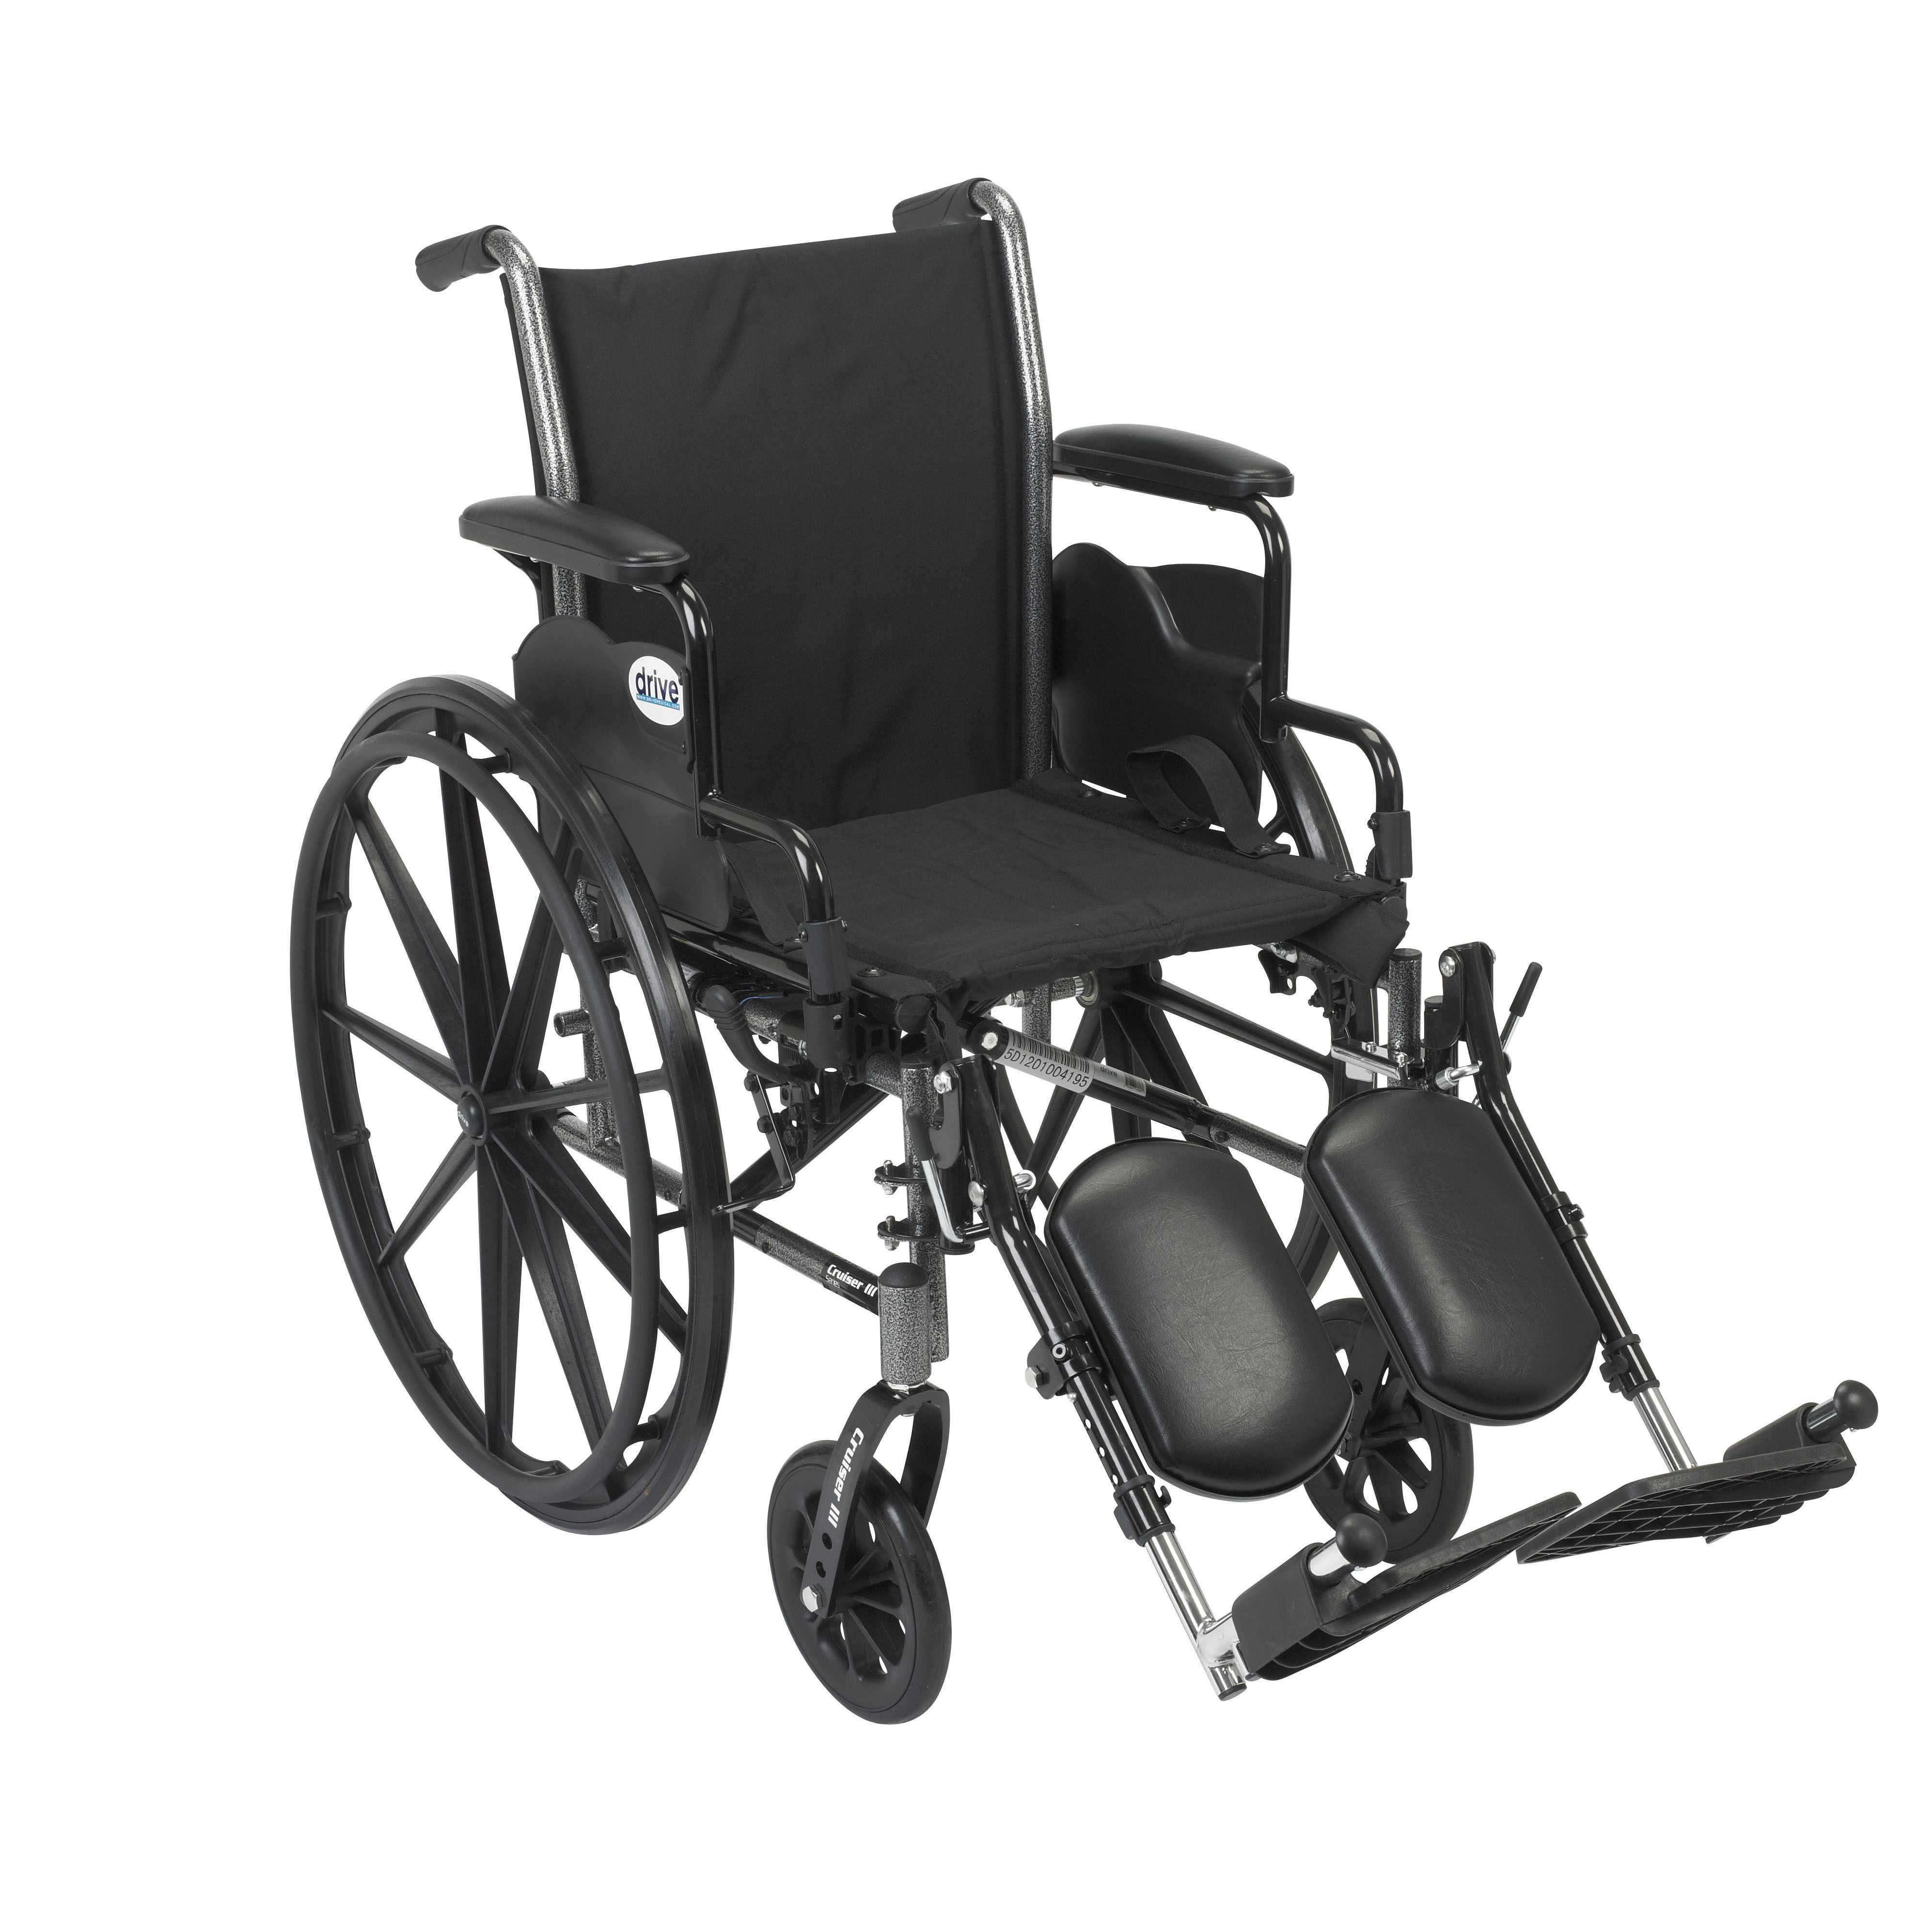 Drive Medical Cruiser III Light Weight Wheelchair with Flip Back Removable Arms, Desk Arms, Elevating Leg Rests, 20" Seat - image 1 of 2